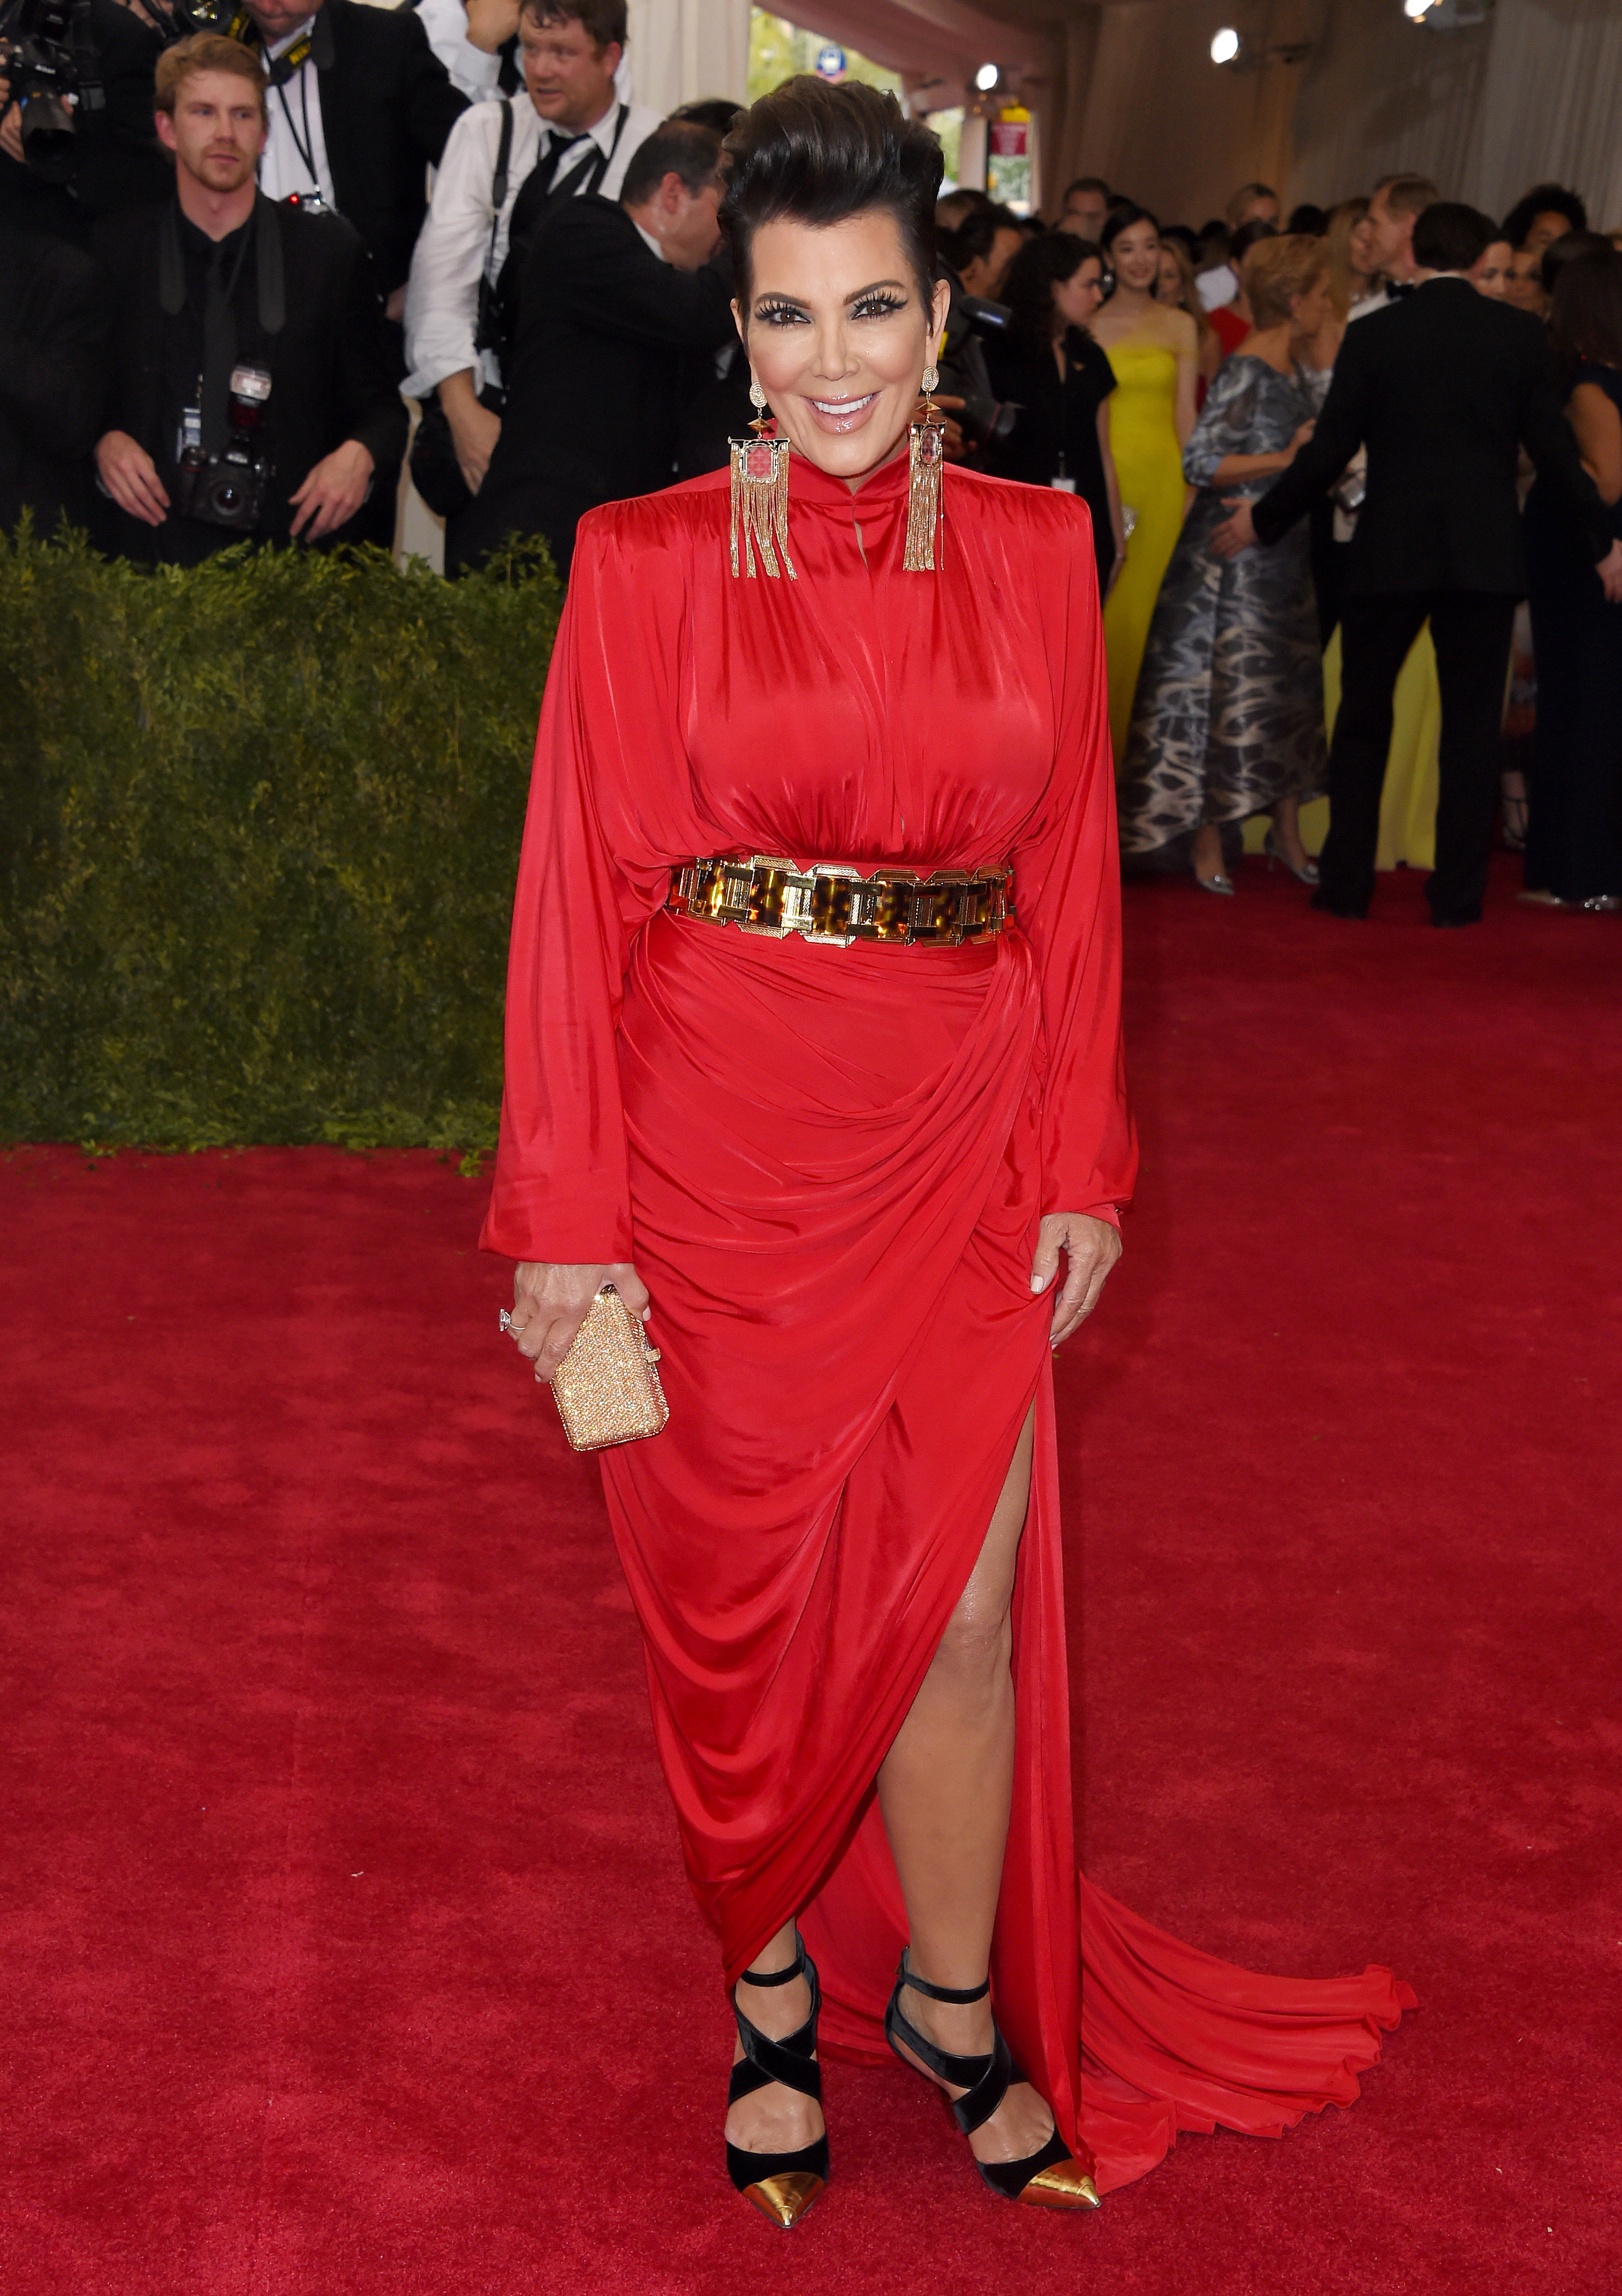 Kris Jenner in a red dress with a thigh-high slit, gold belt, and large earrings at an event